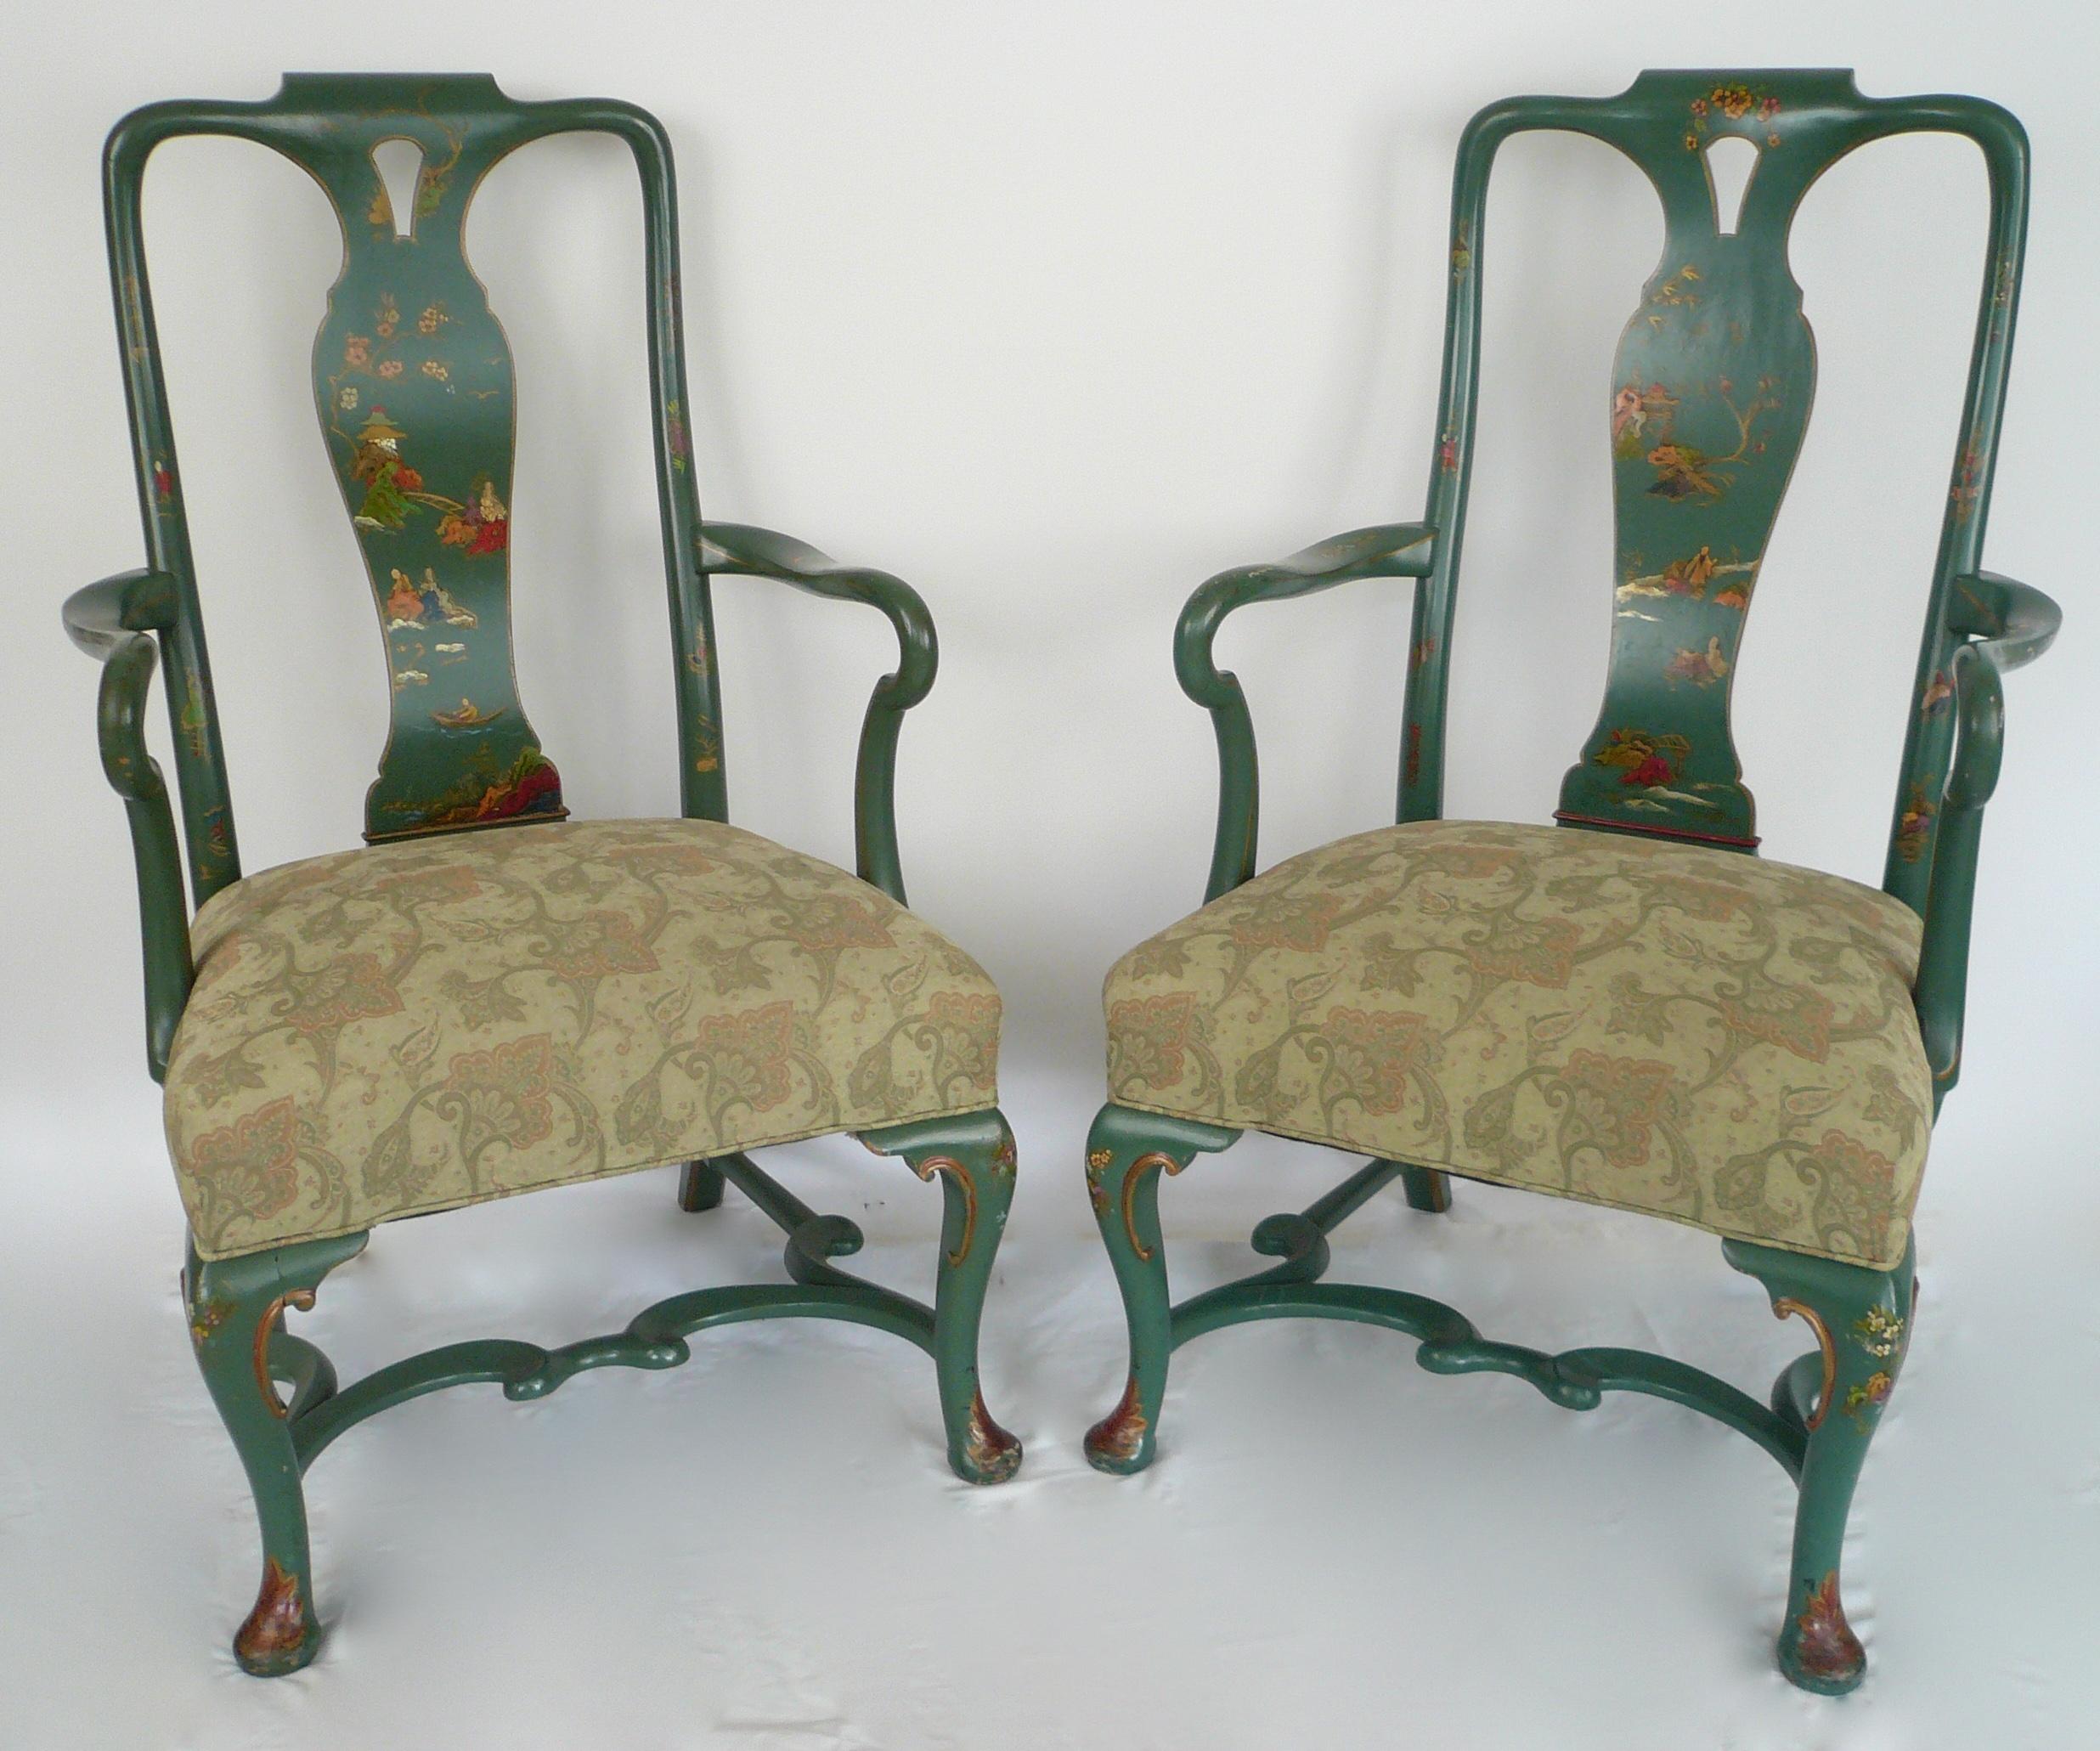 These substantially proportioned chairs feature hand painted chinoiserie motifs on a green ground.